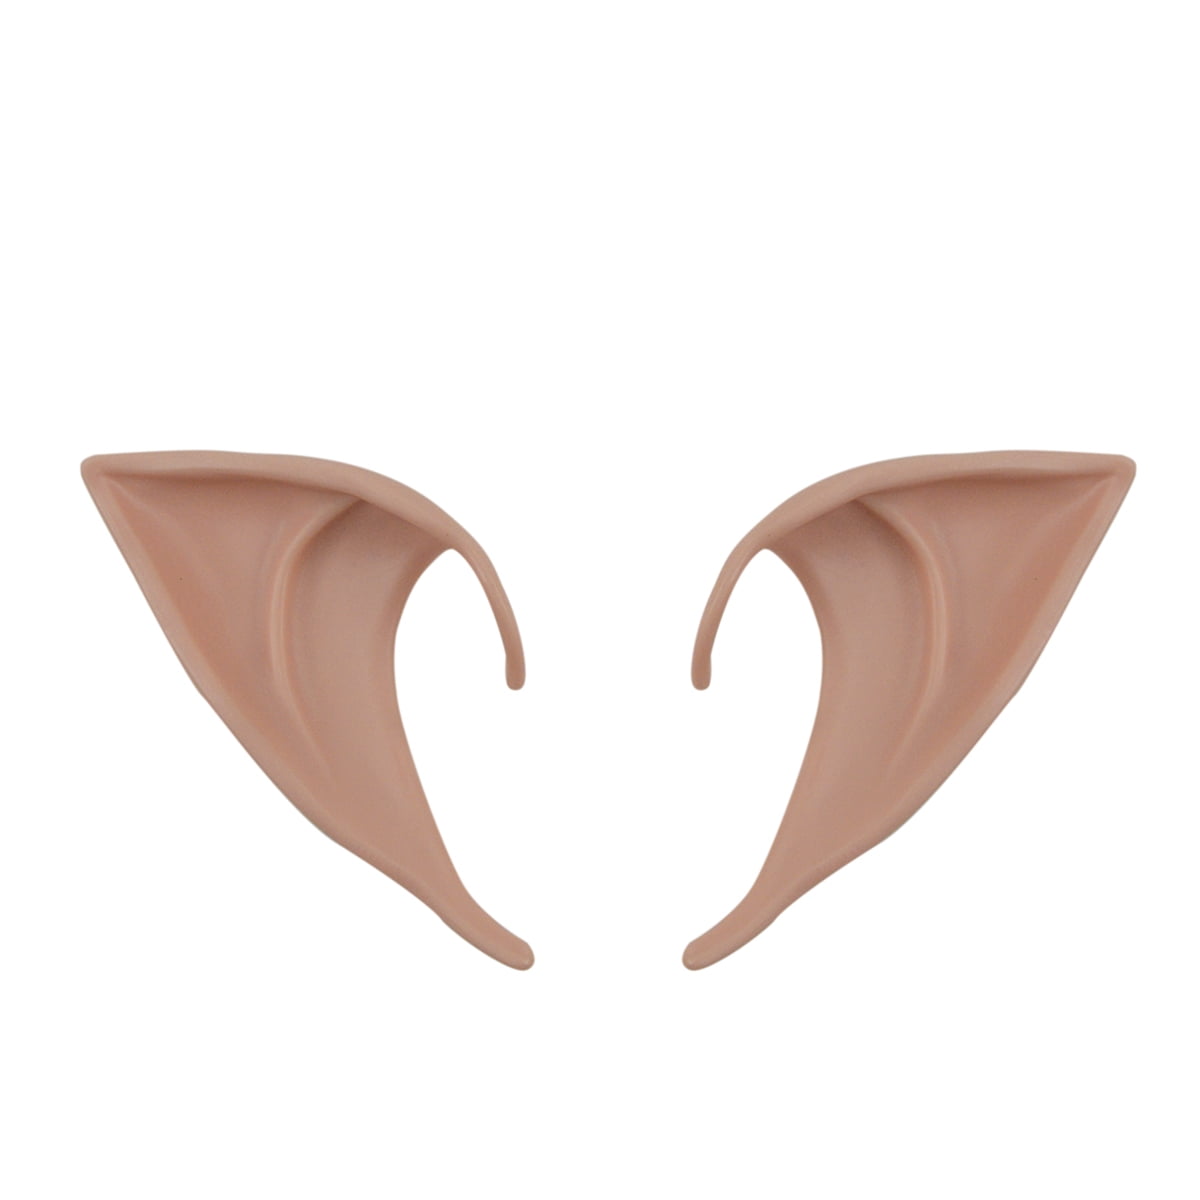 SHIPS FAST The Hobbit Latex Elf Ears Cosplay Party Props Creative Gift Halloween